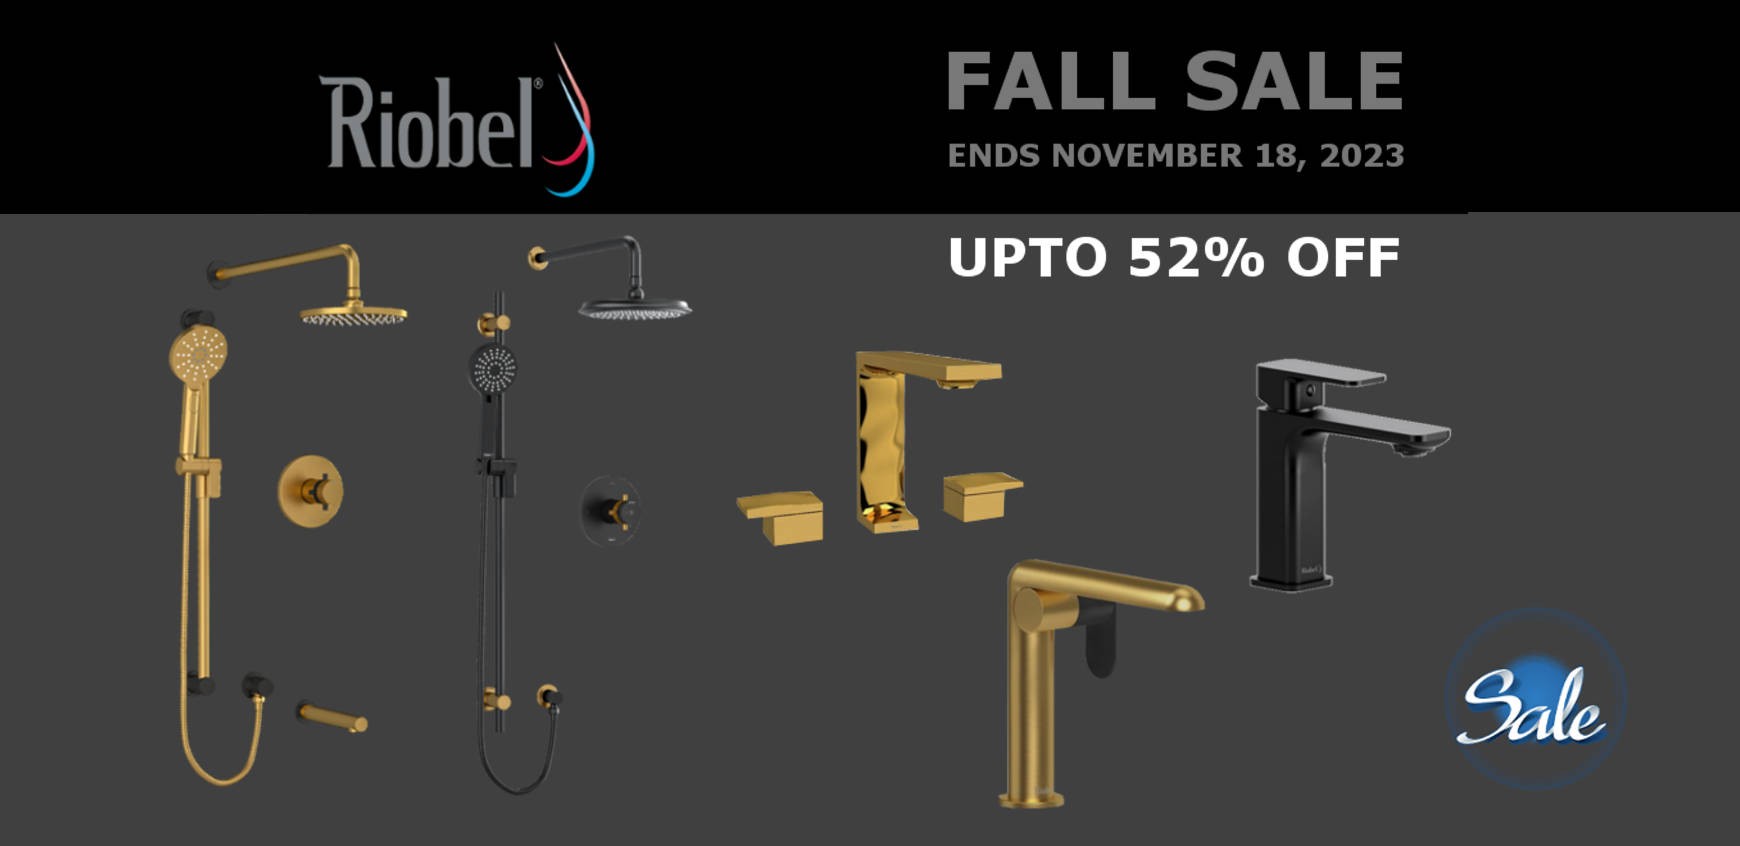 FALL SALE UP TO 50% OFF